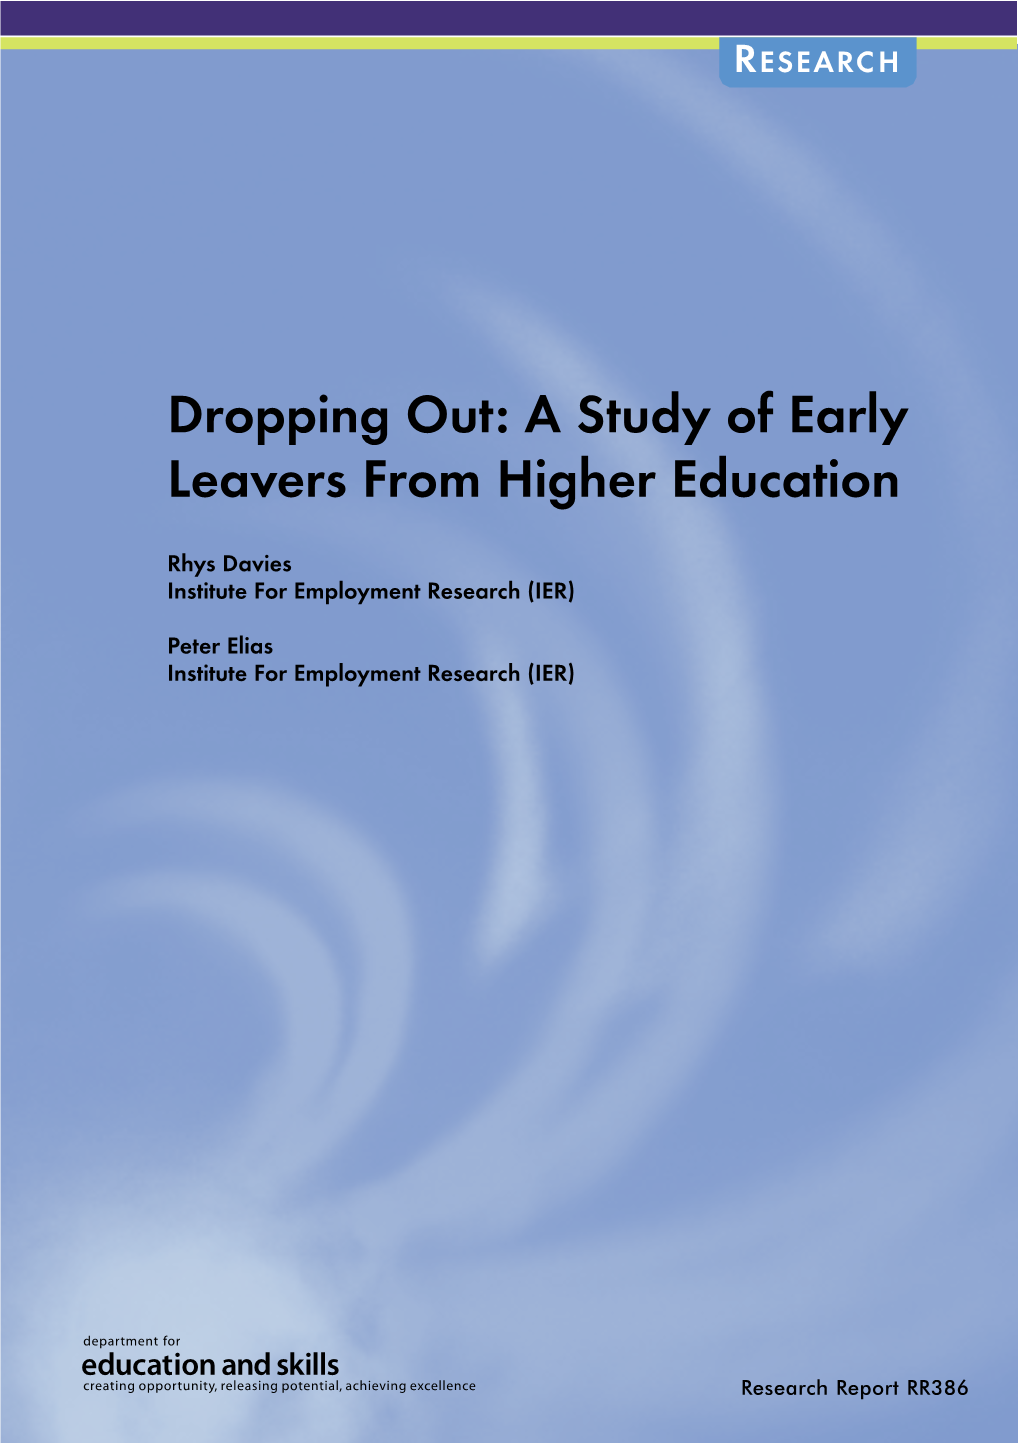 Dropping Out: a Study of Early Leavers from Higher Education